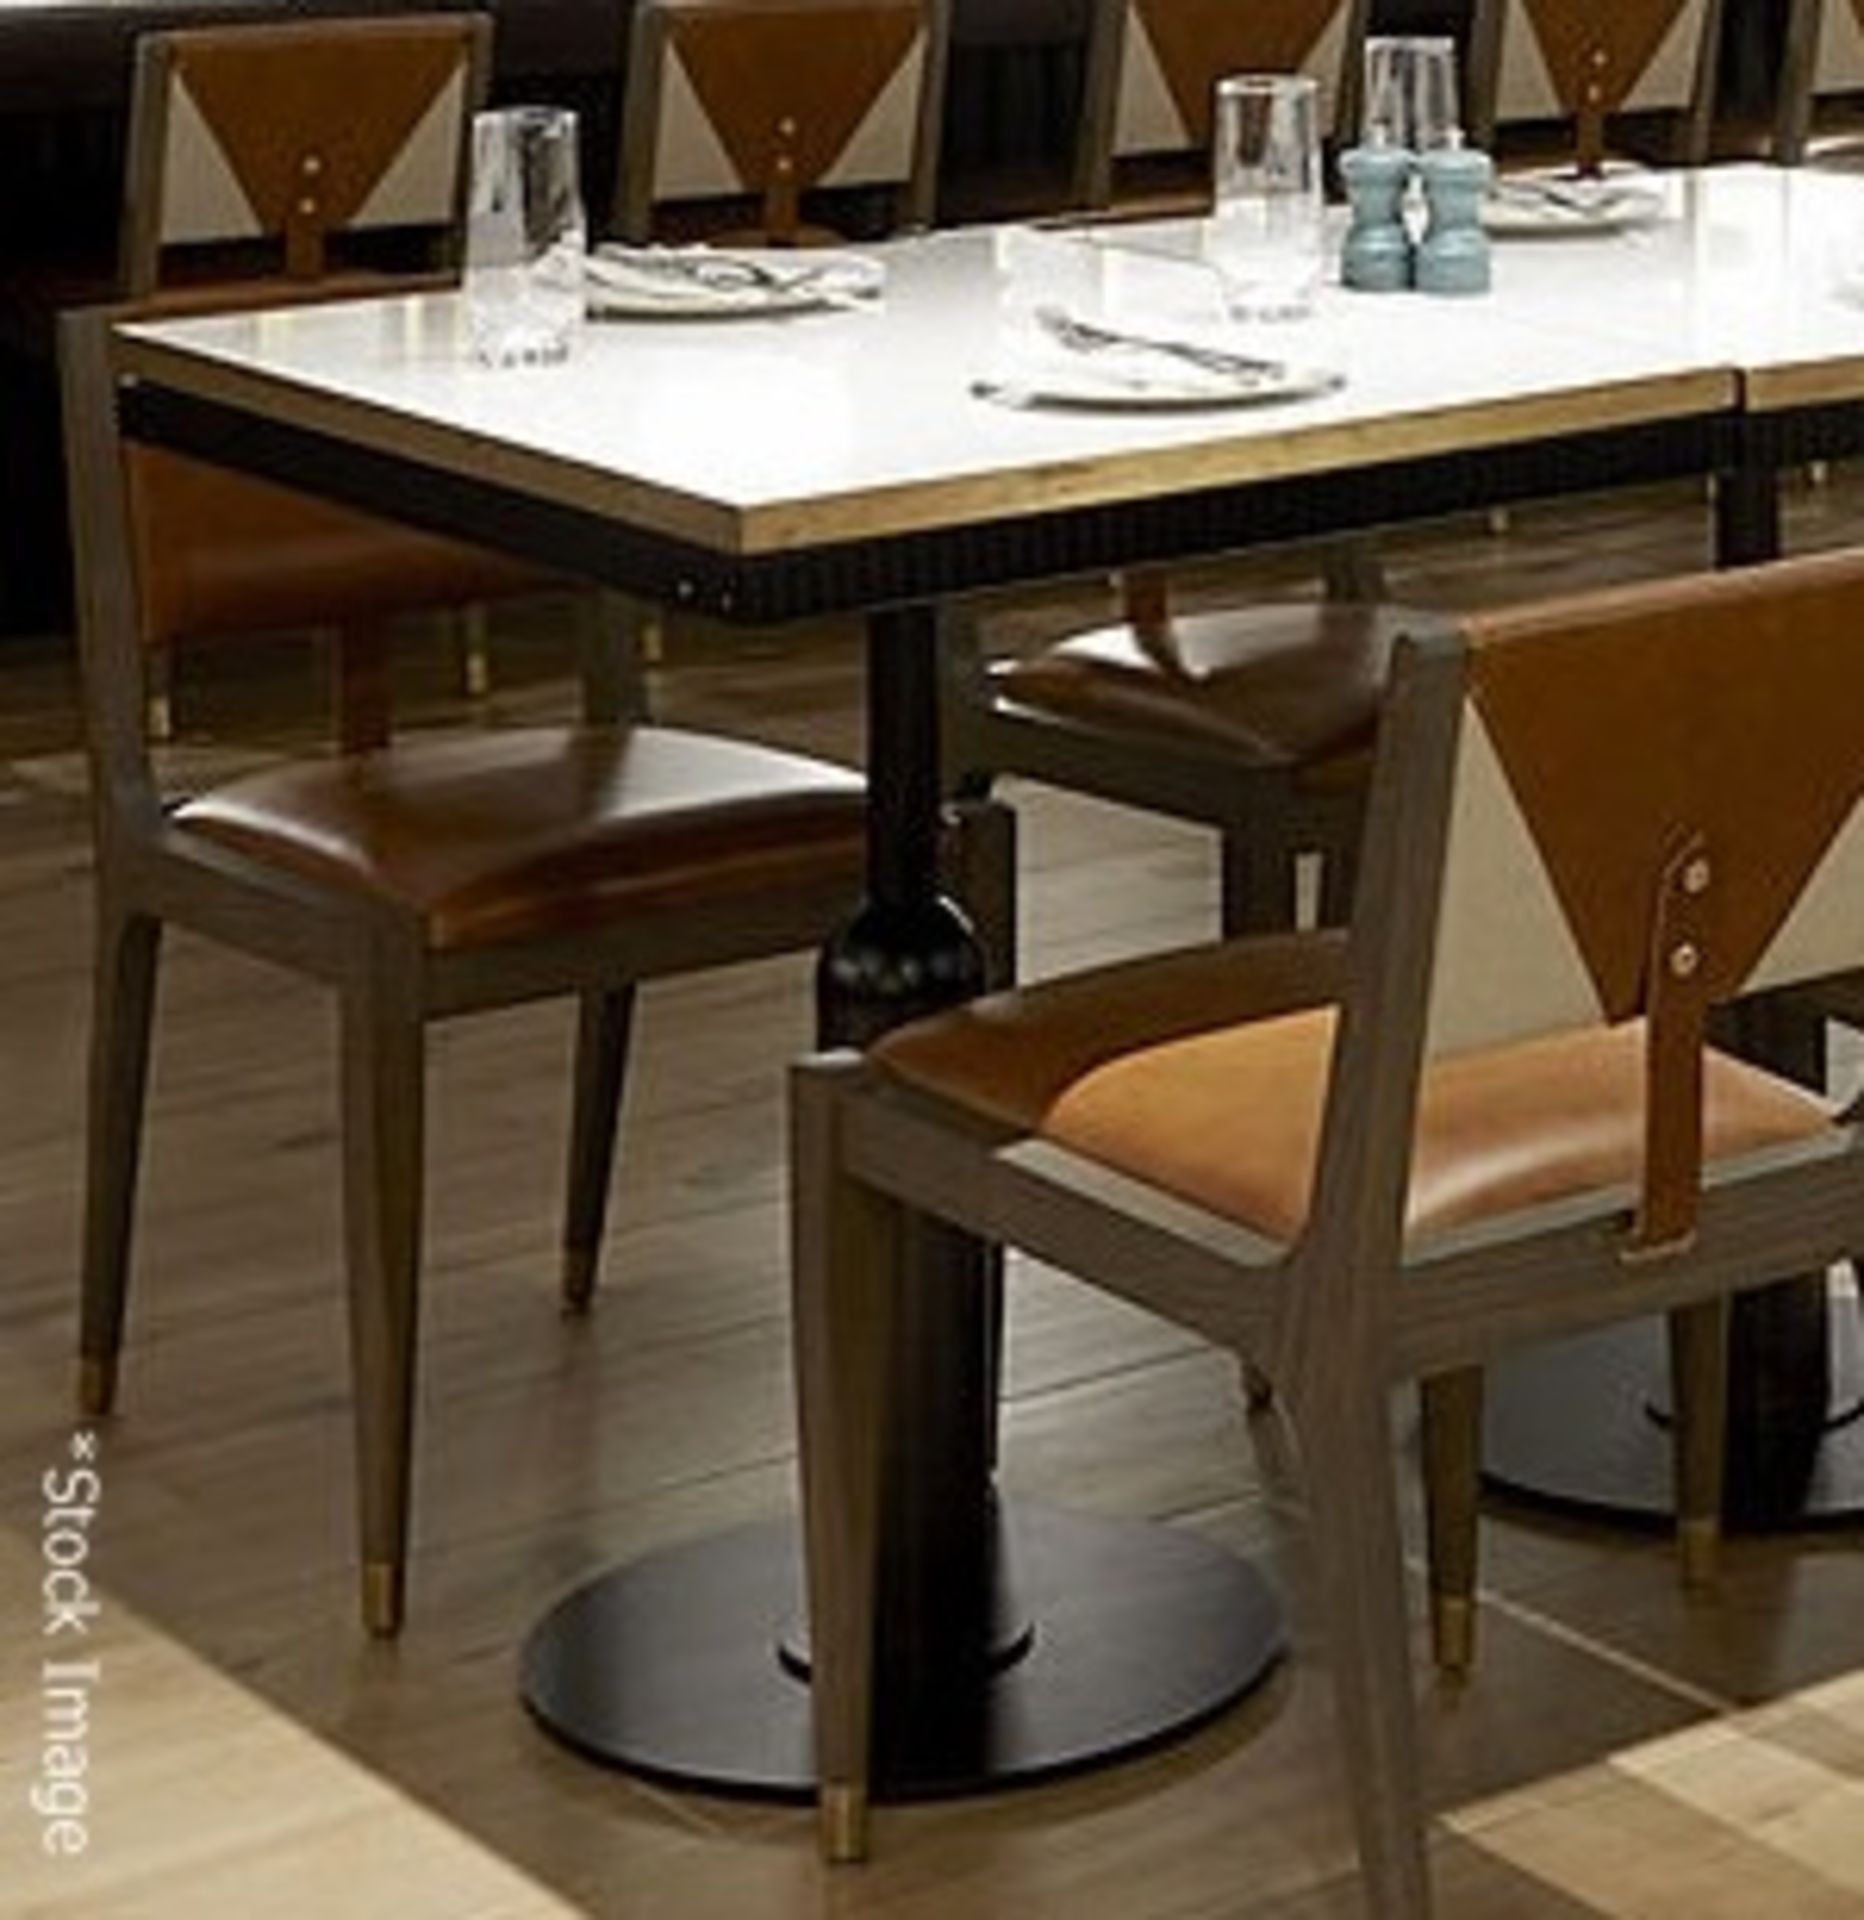 1 x Specially Commissioned Industrial-Style Marble-Topped Square Bistro Table With A Brass Trim - - Image 6 of 6